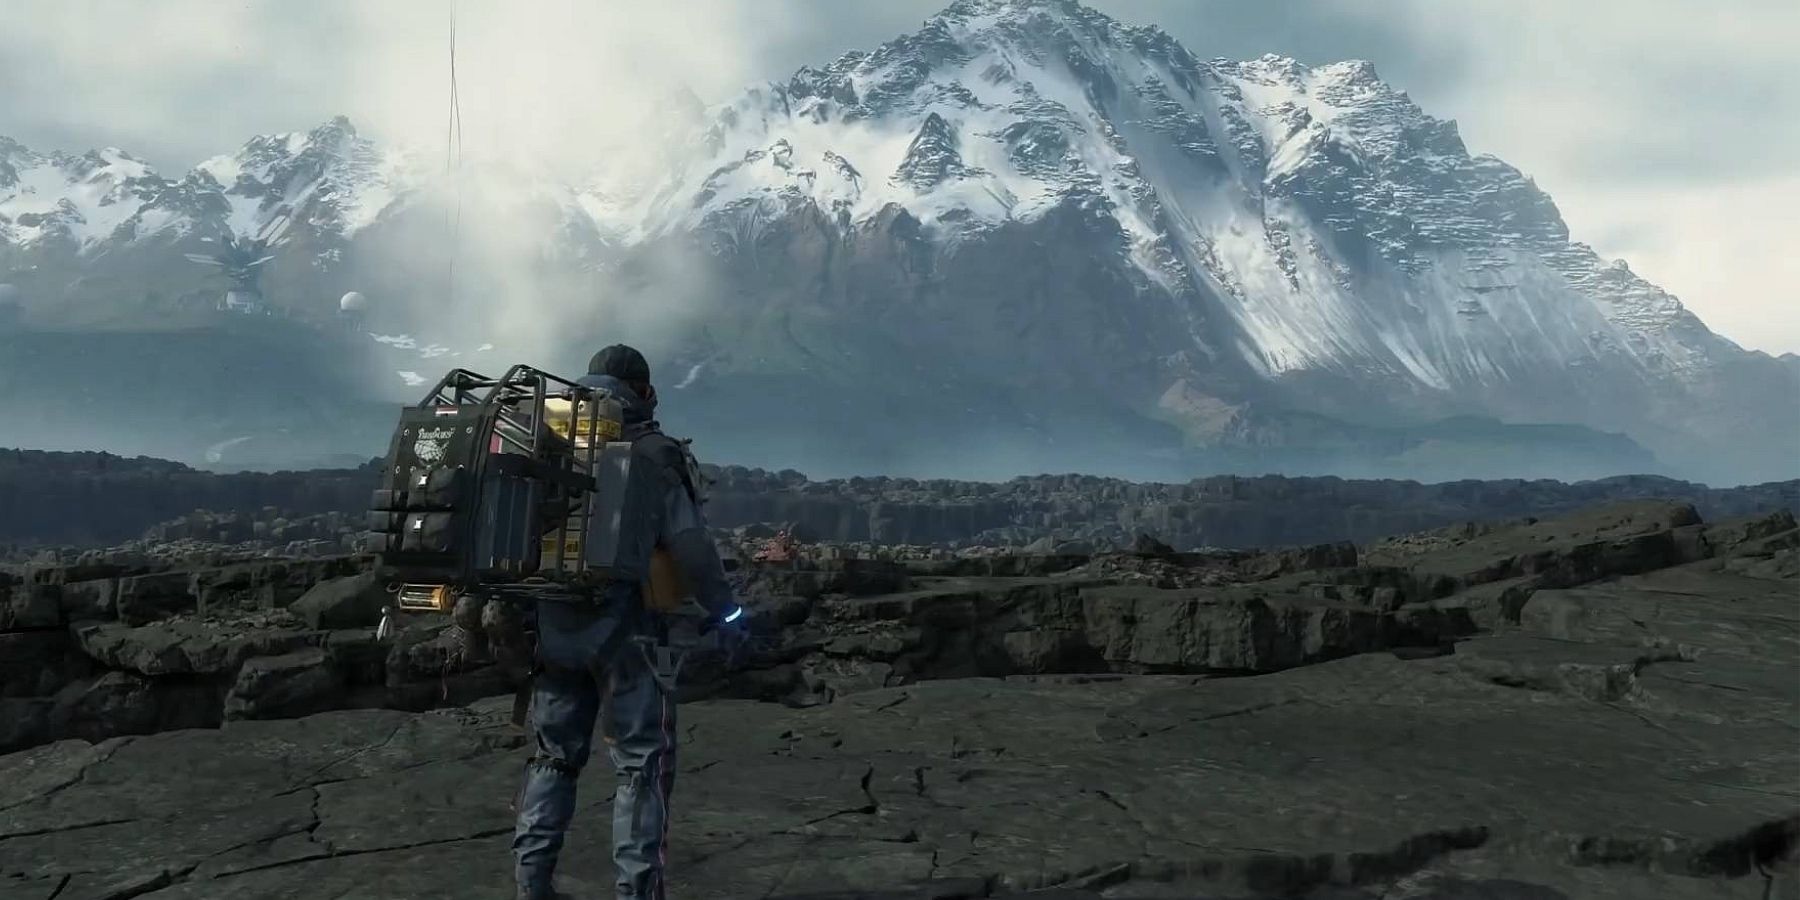 Sam looking at a mountain in the distance in Death Stranding